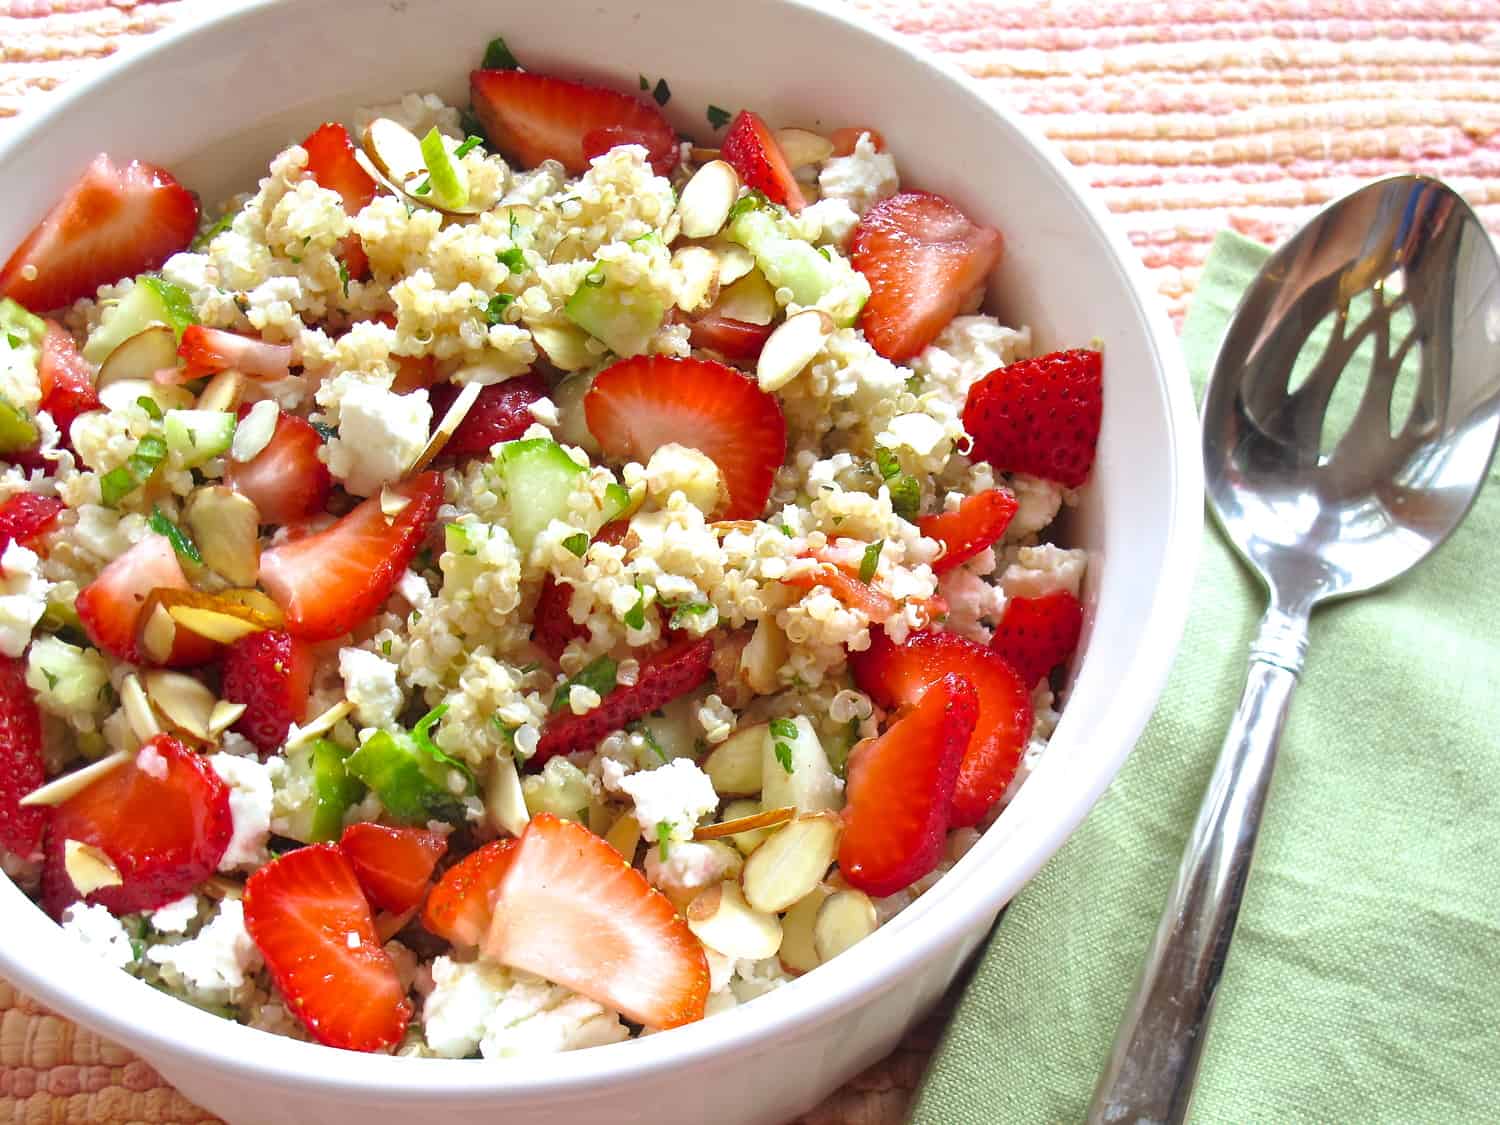 Quinoa salad with strawberries, almonds, and mint